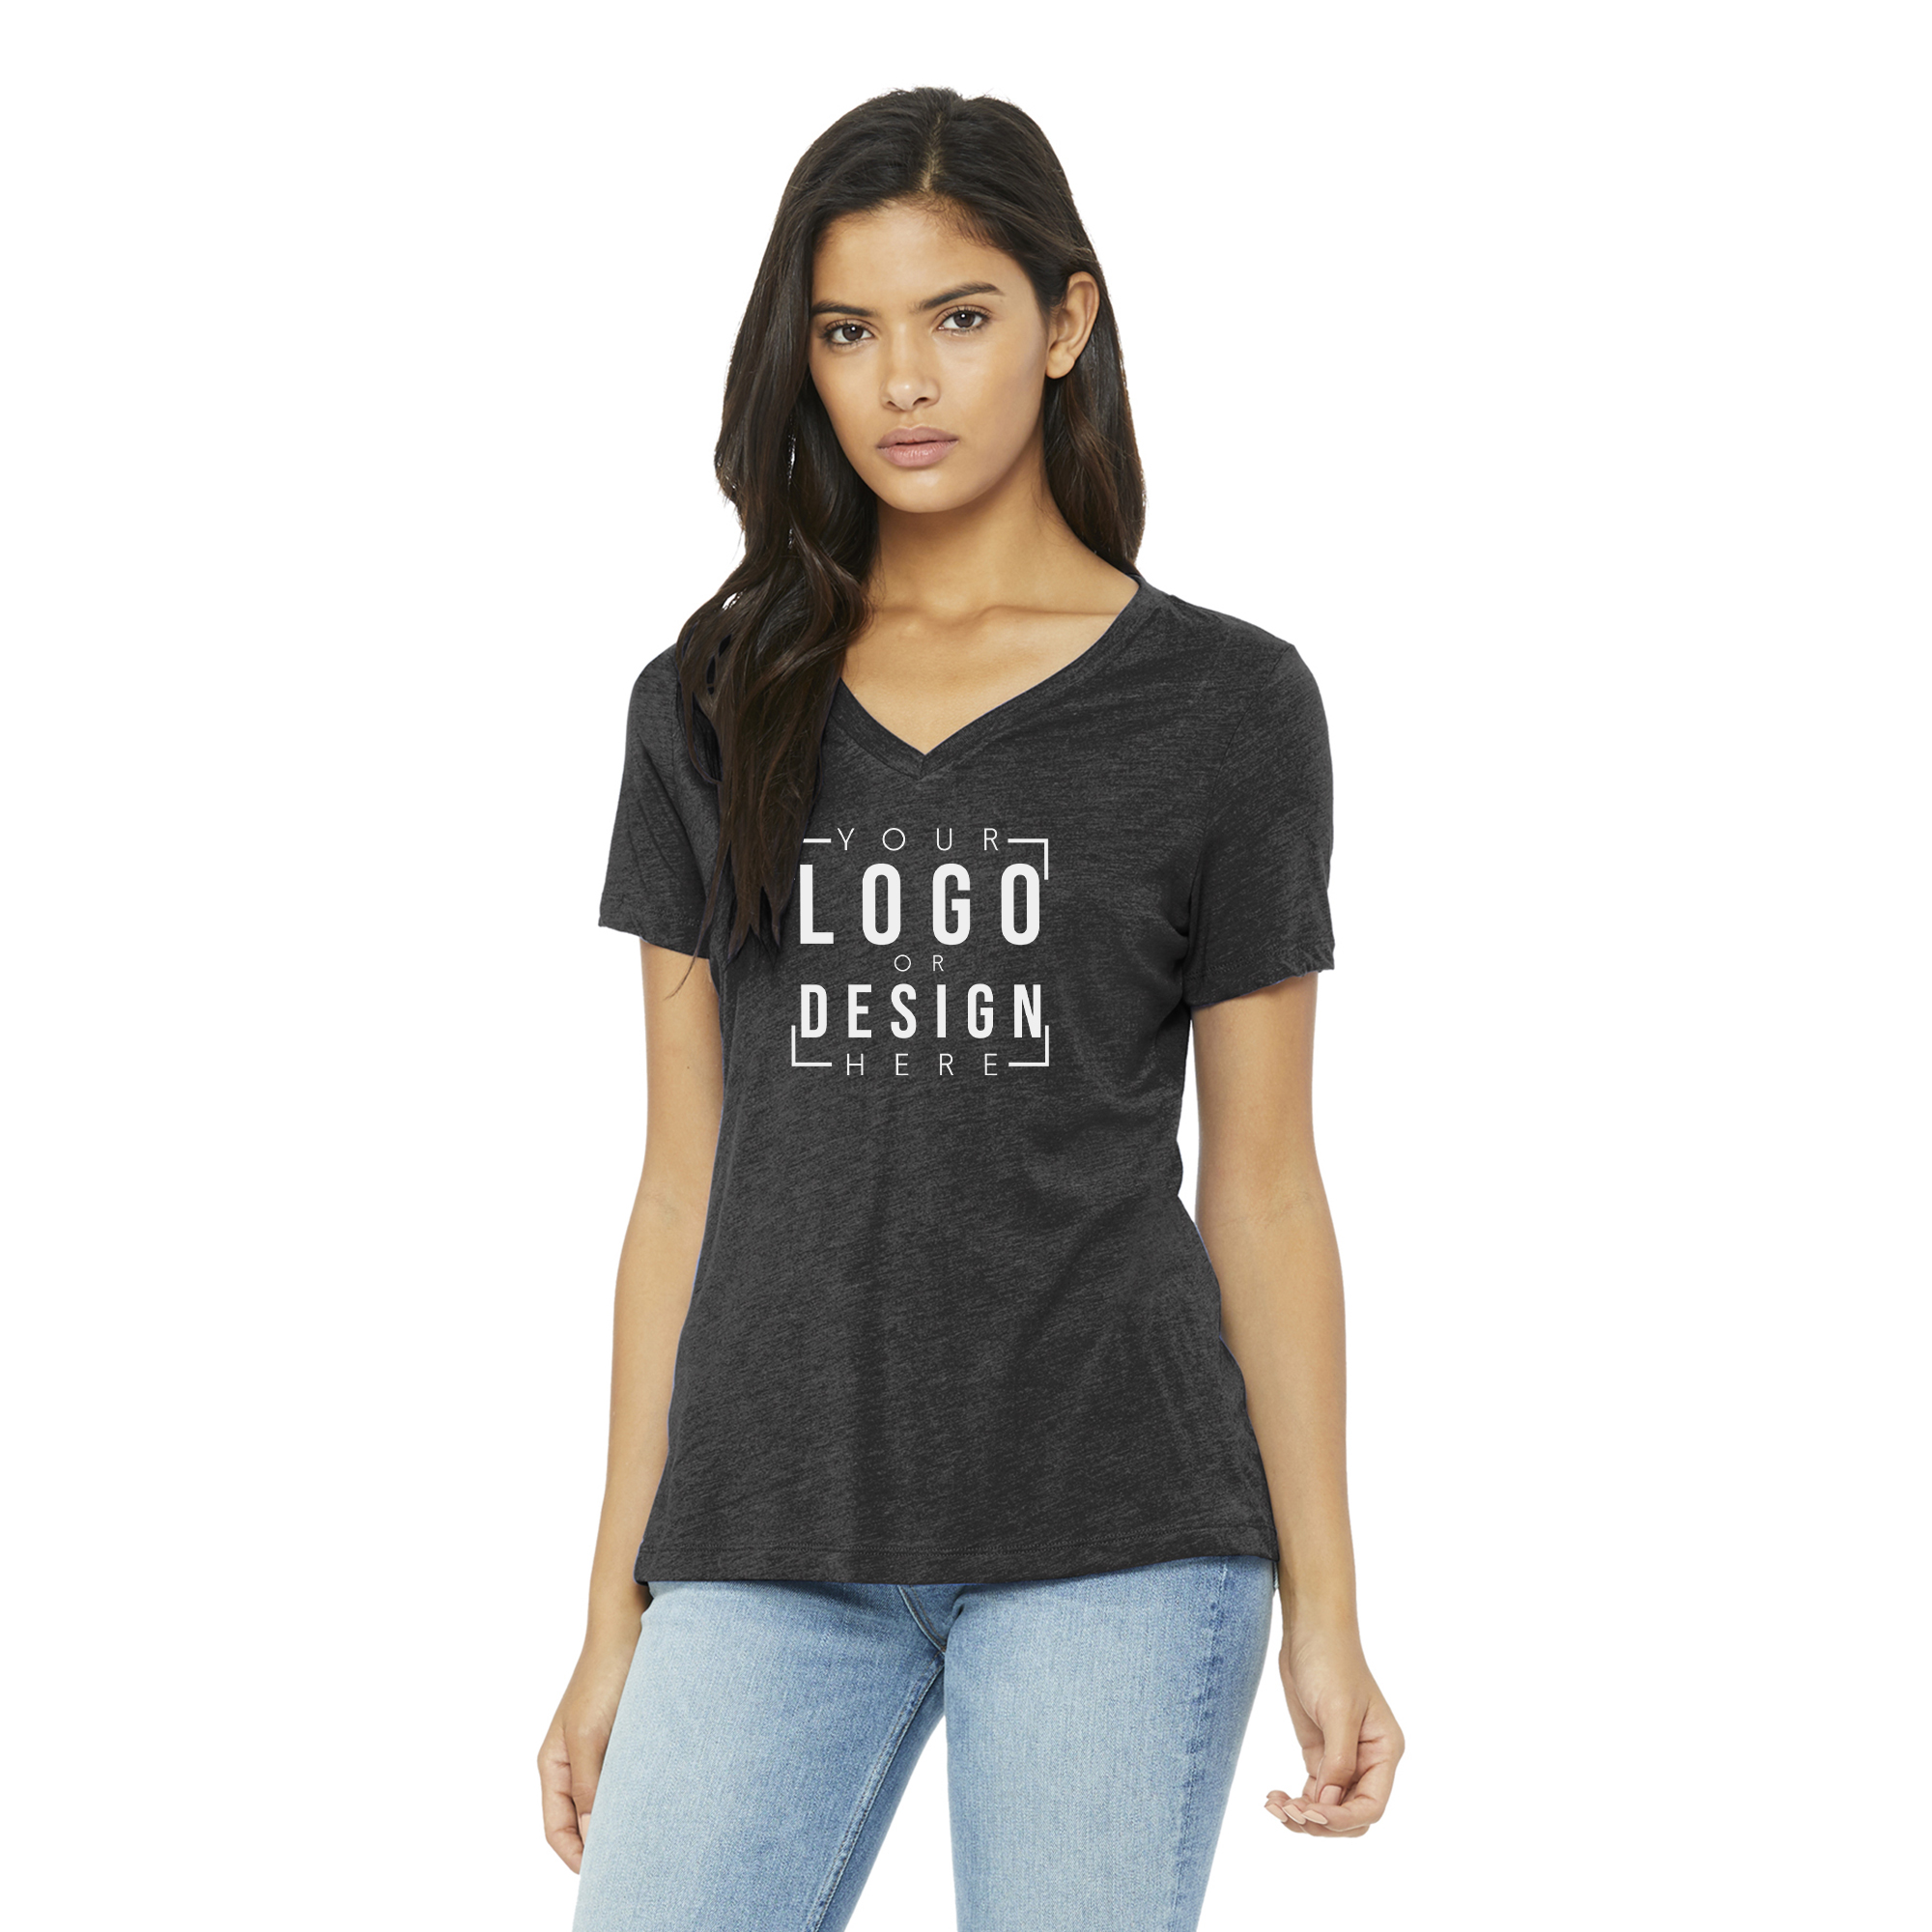 BELLA+CANVAS Women's Relaxed Triblend V-Neck Tee